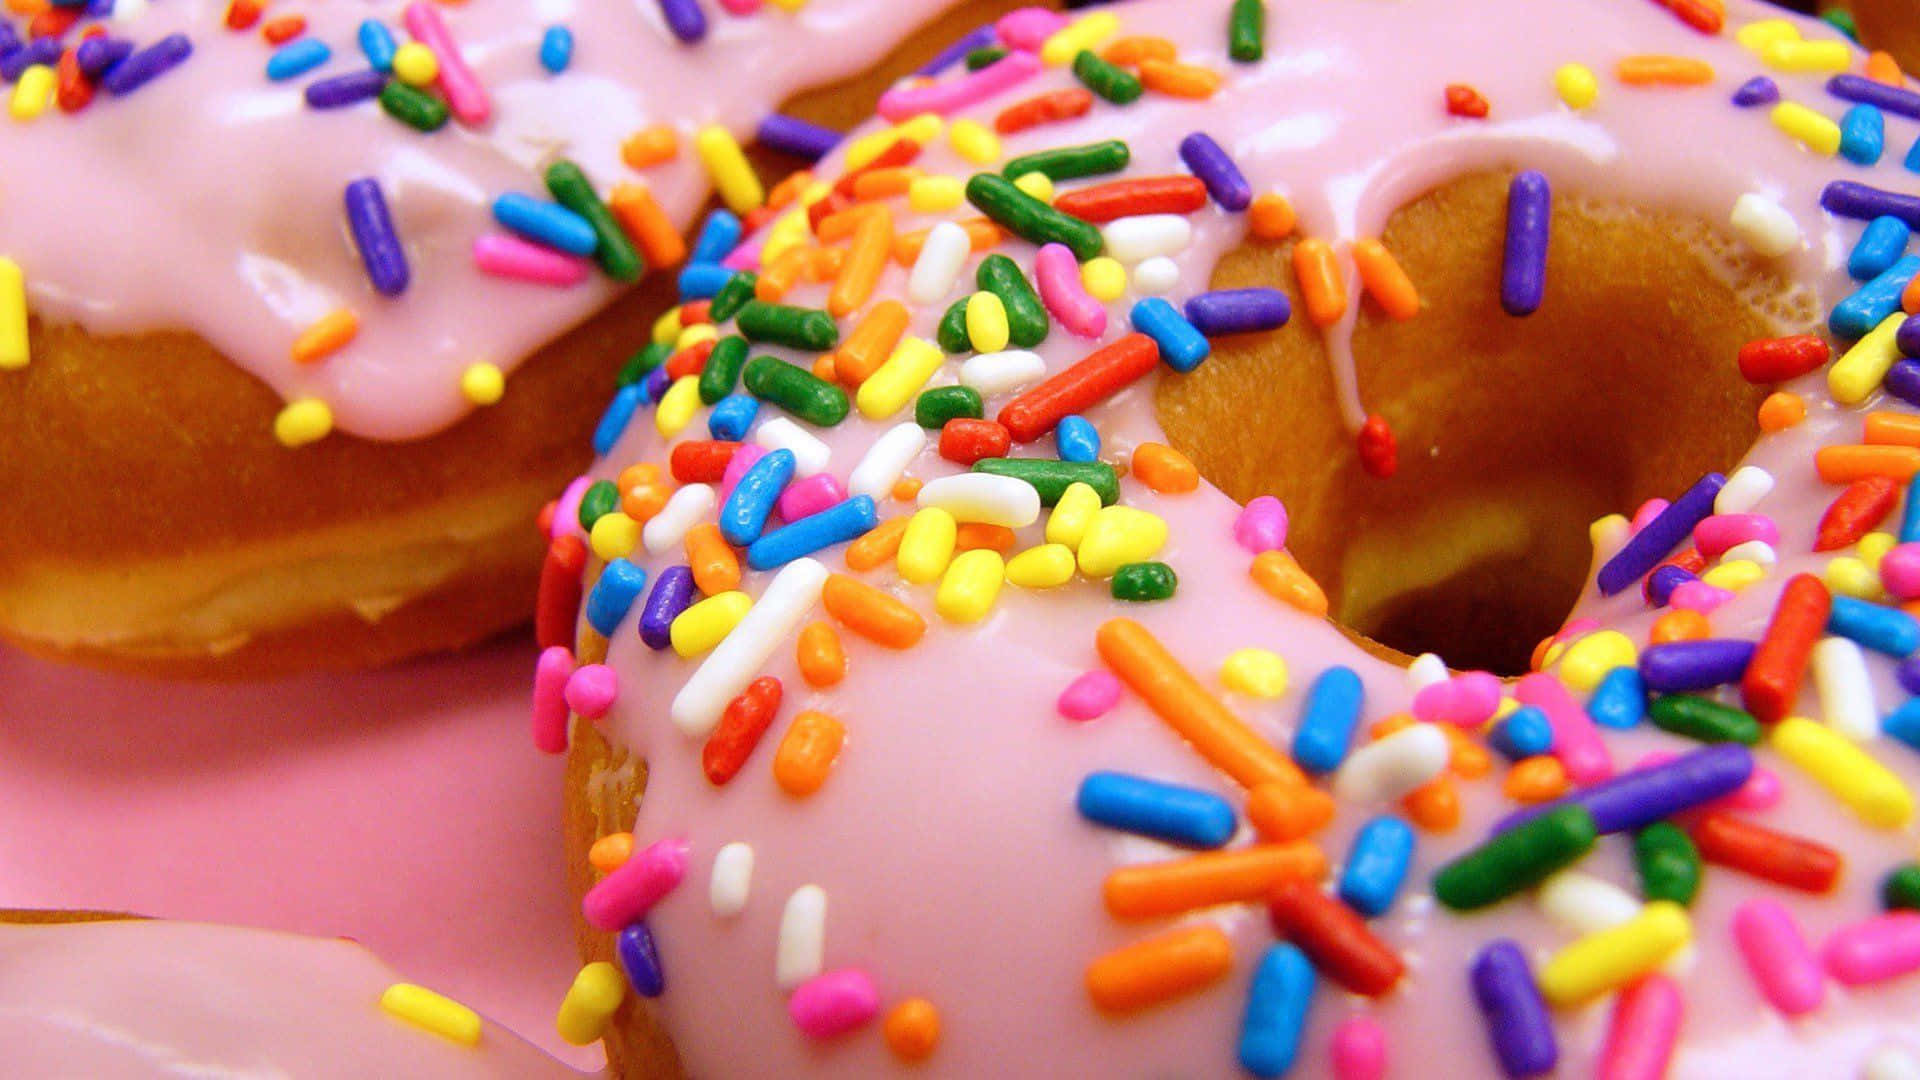 "Life is sweet, just like donuts!"